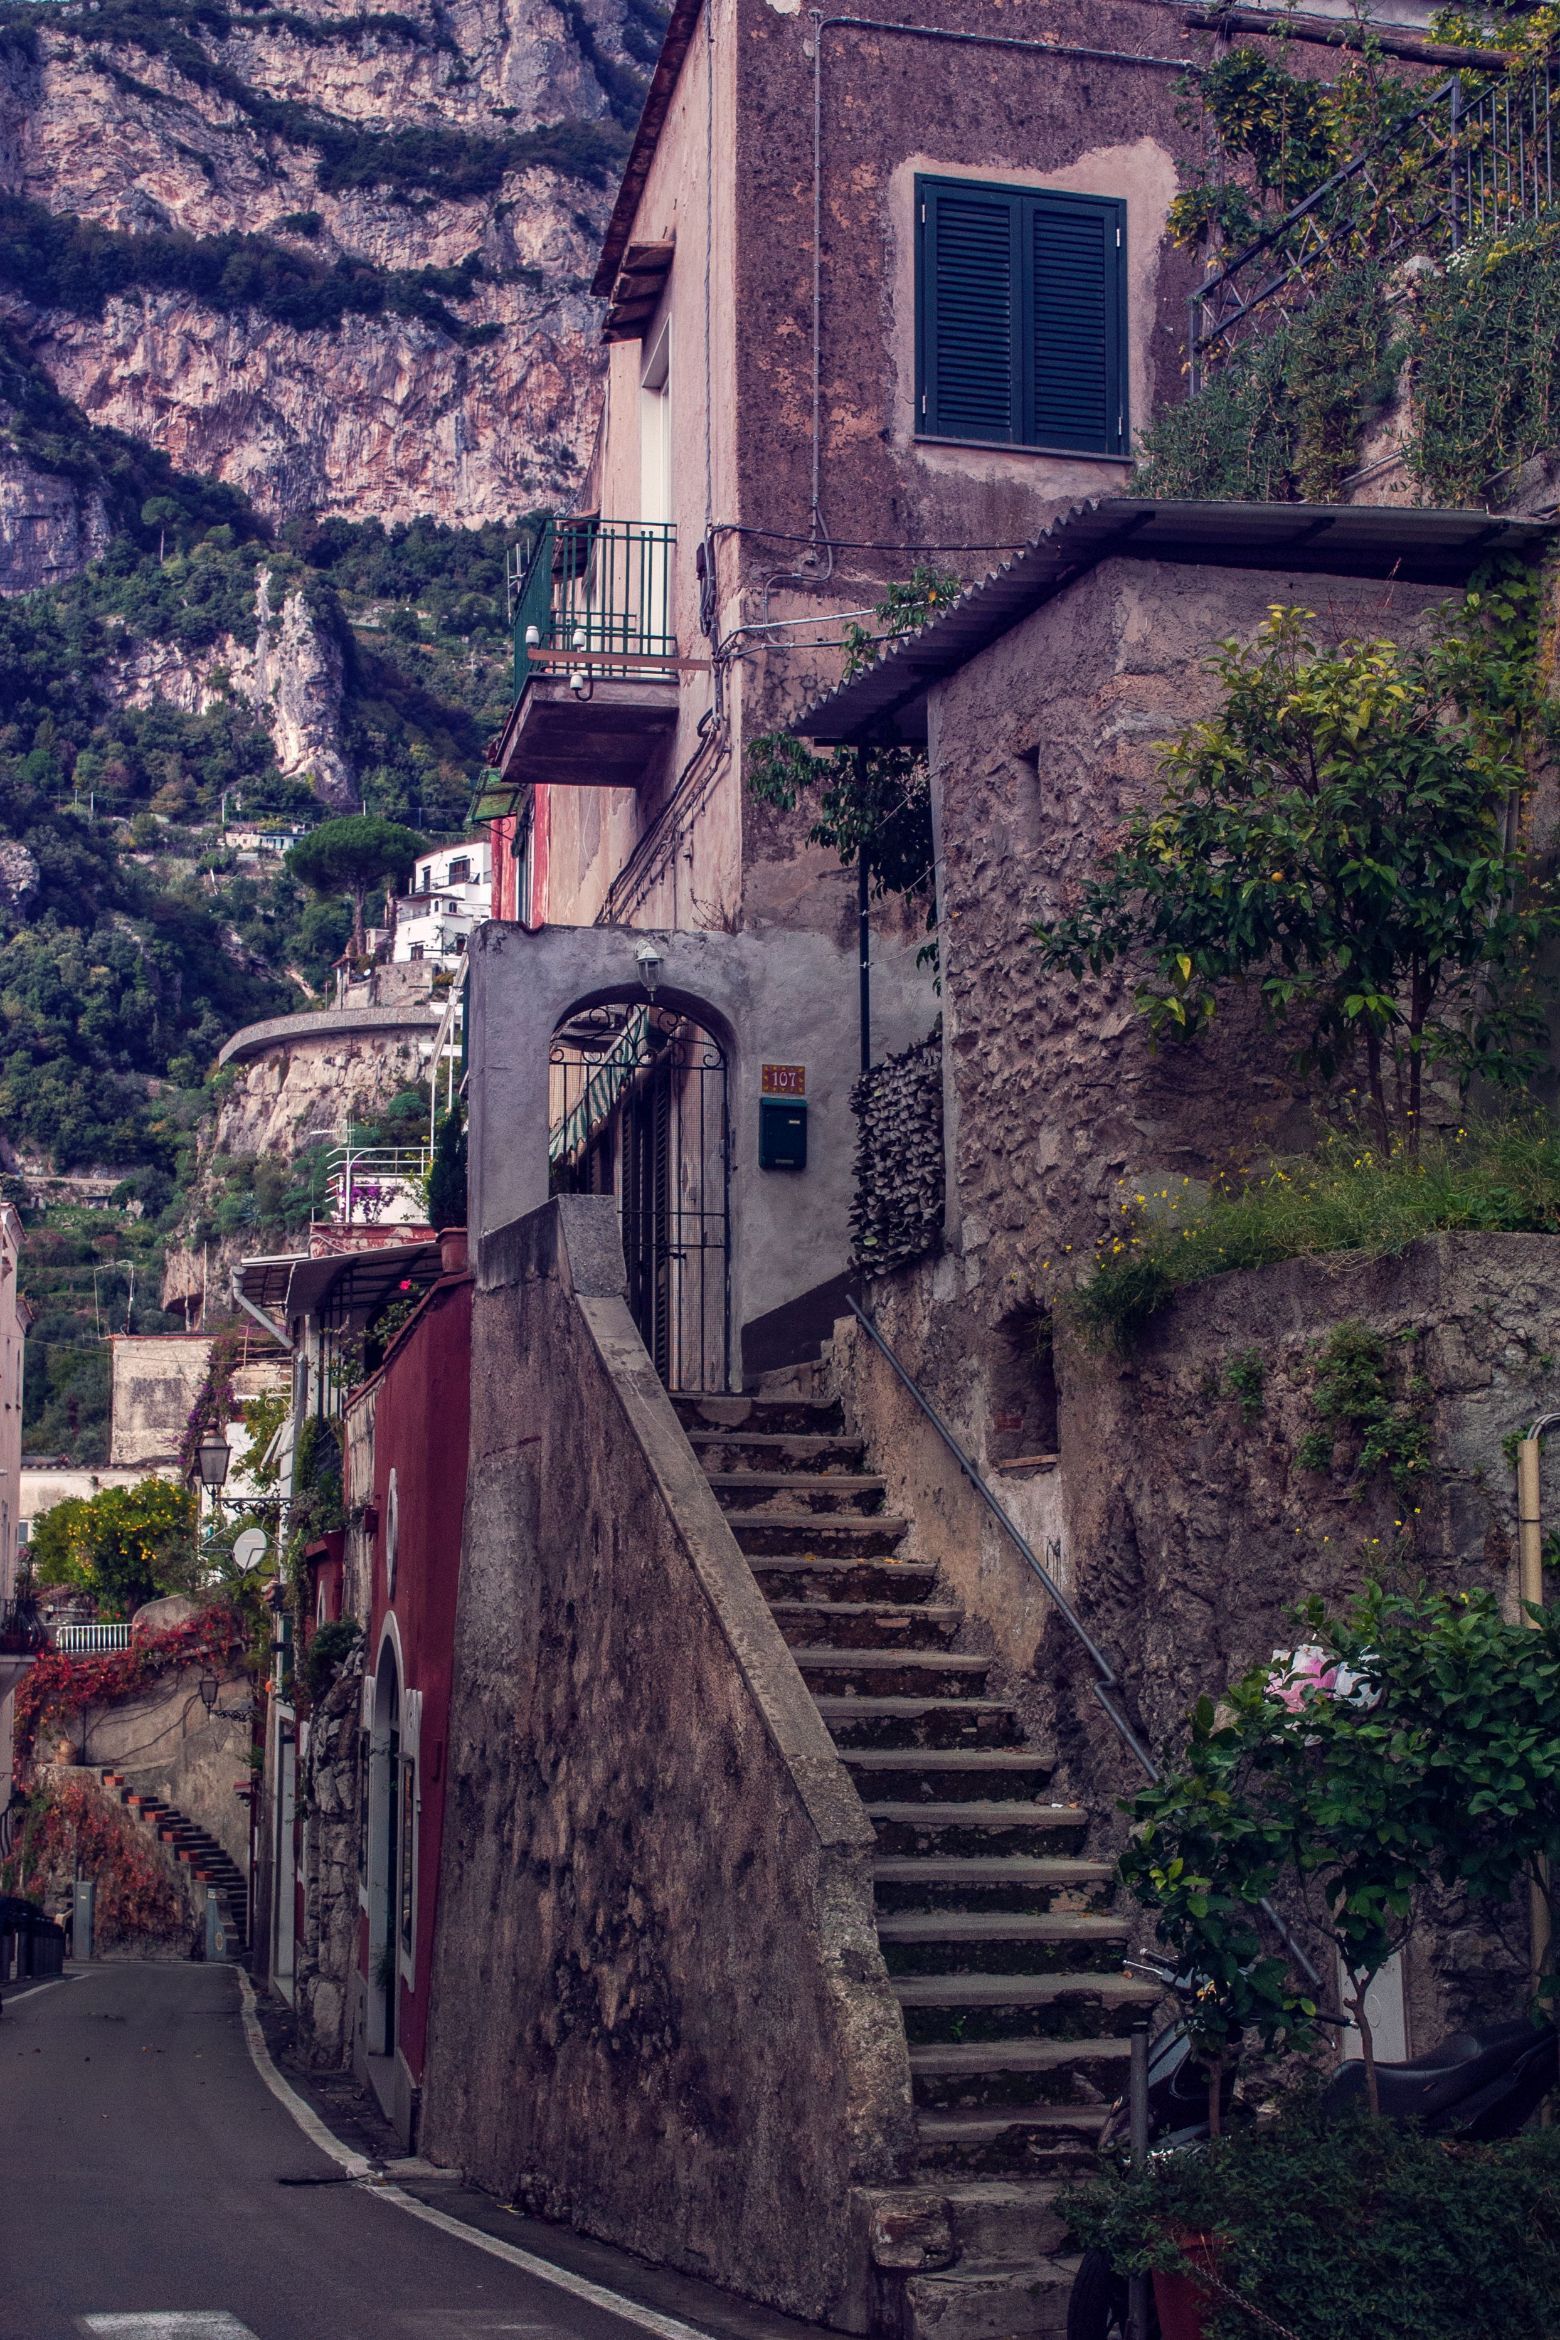 The narrow stairs and streets in the tourist village of Positano, on the Amalfi coast. Photo: Getty